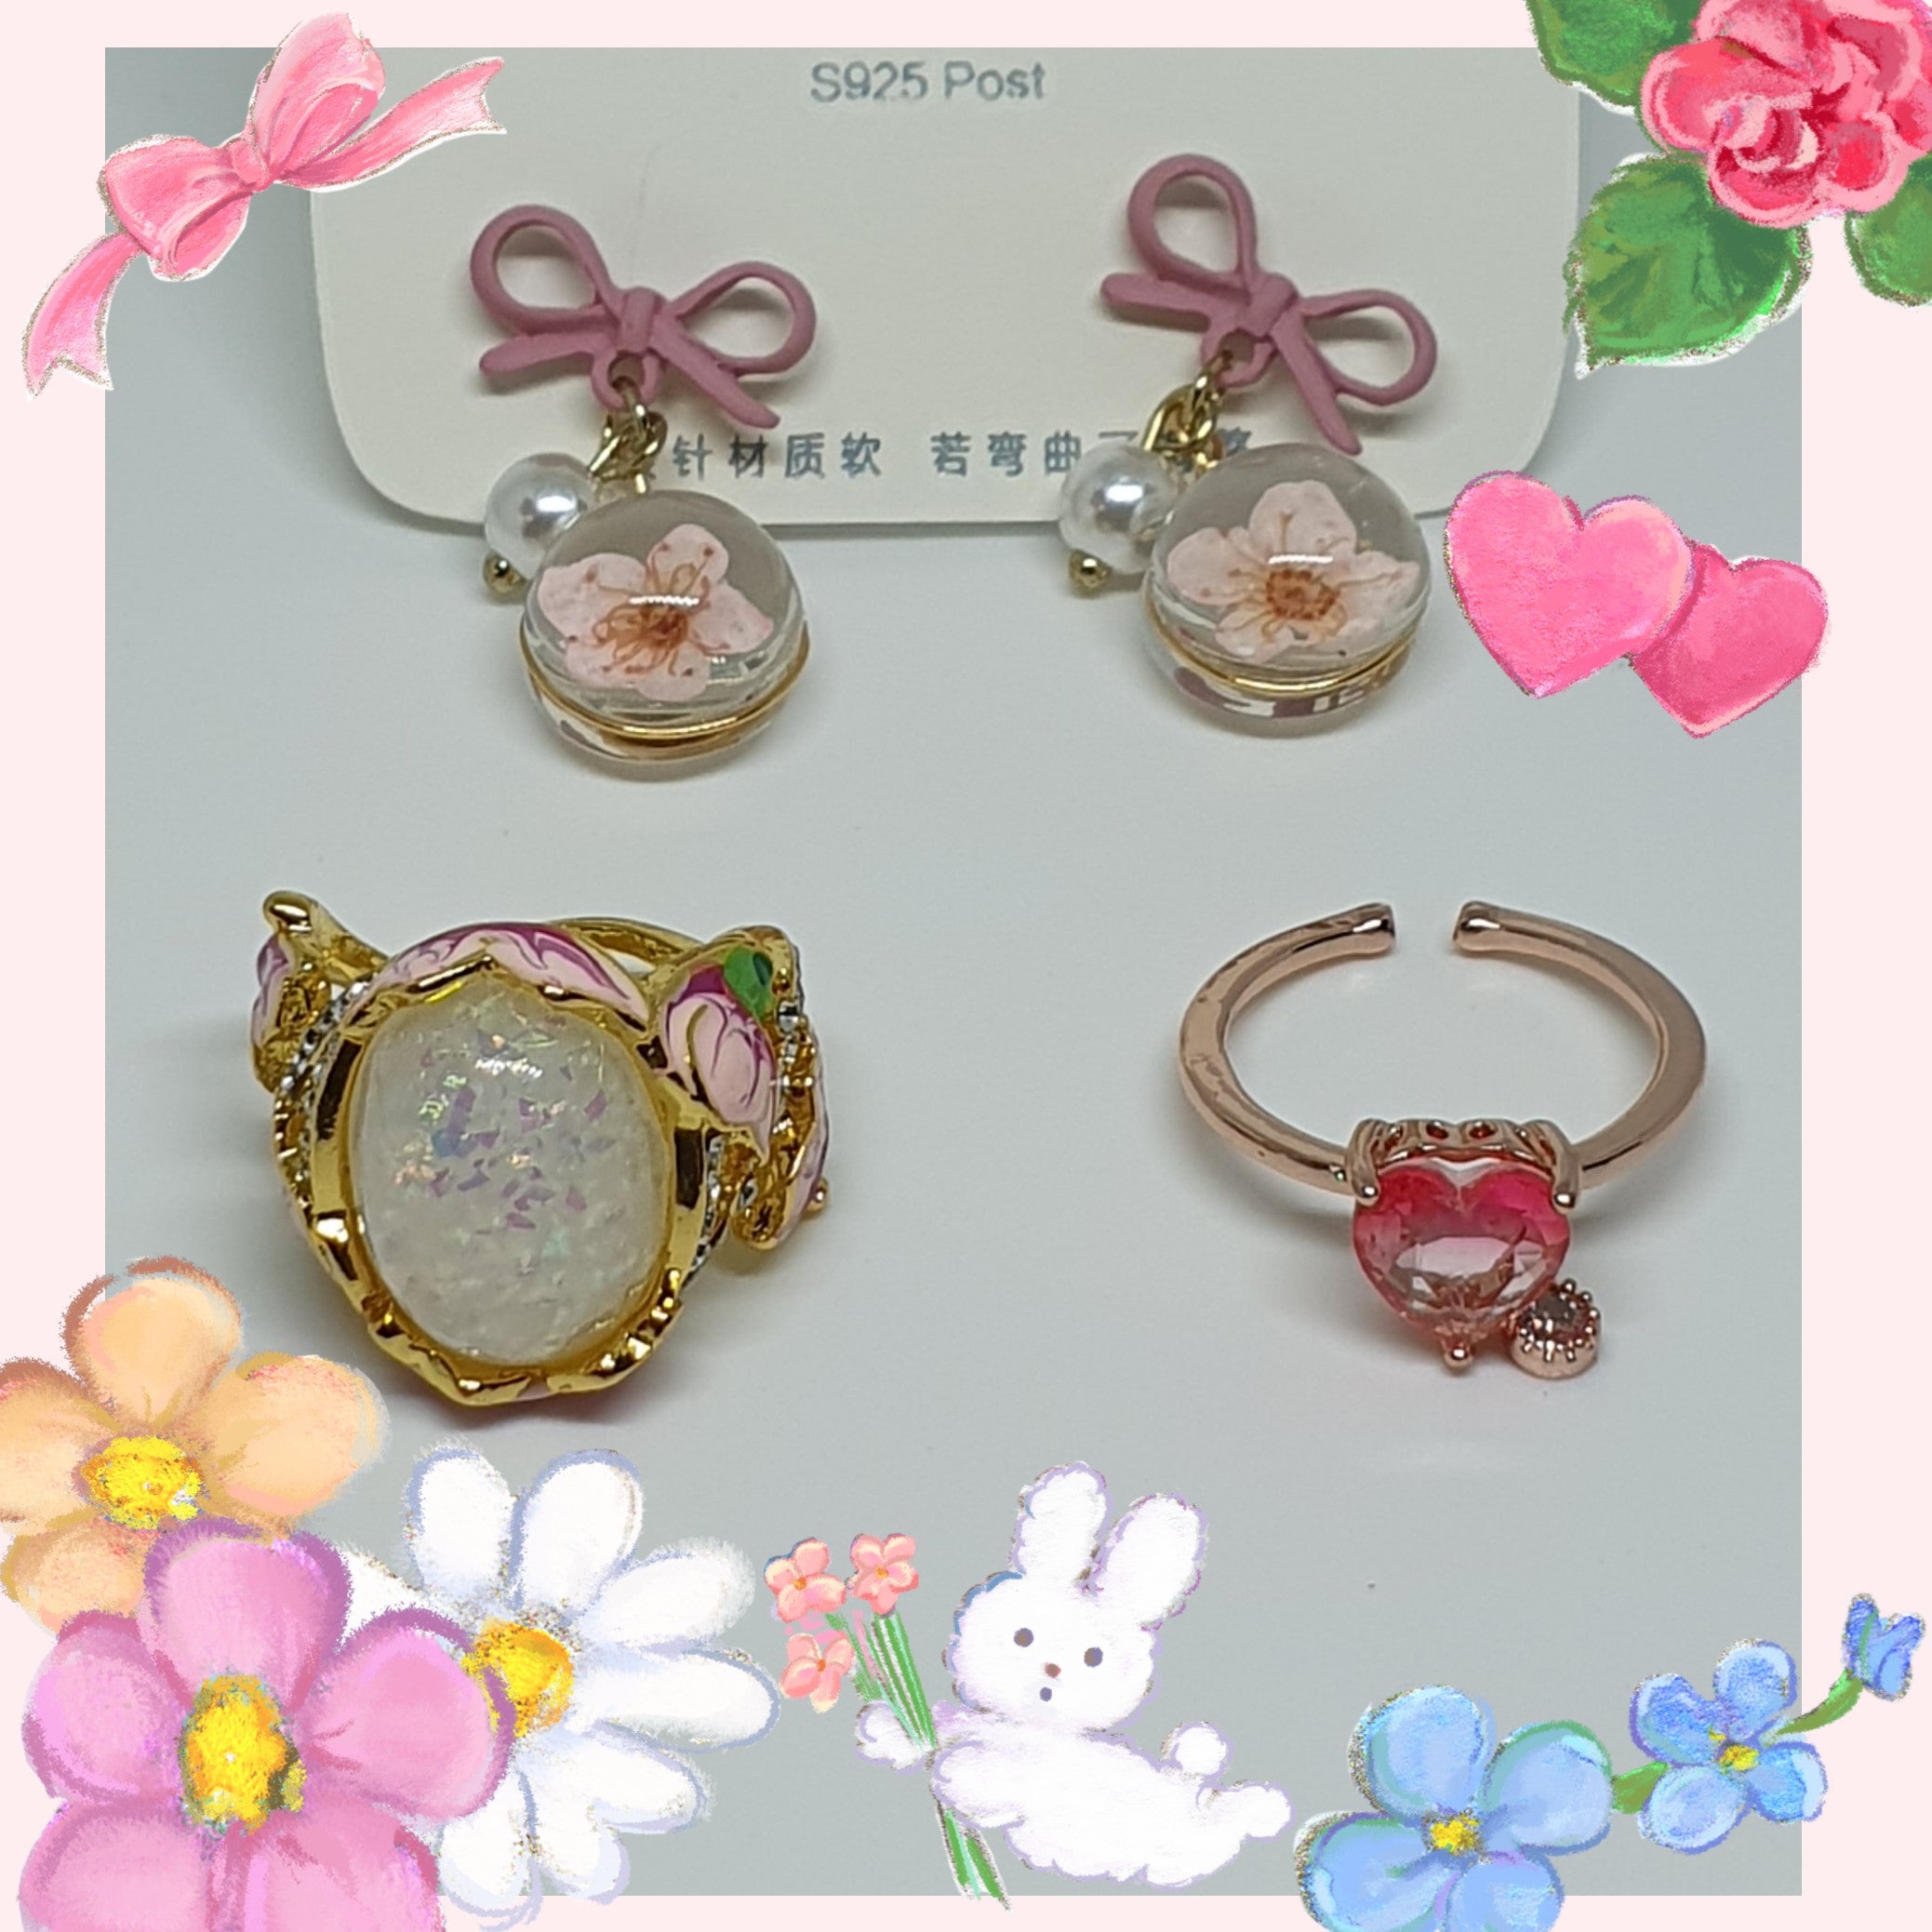 Flower Ring & Earrings and Heart Ring package